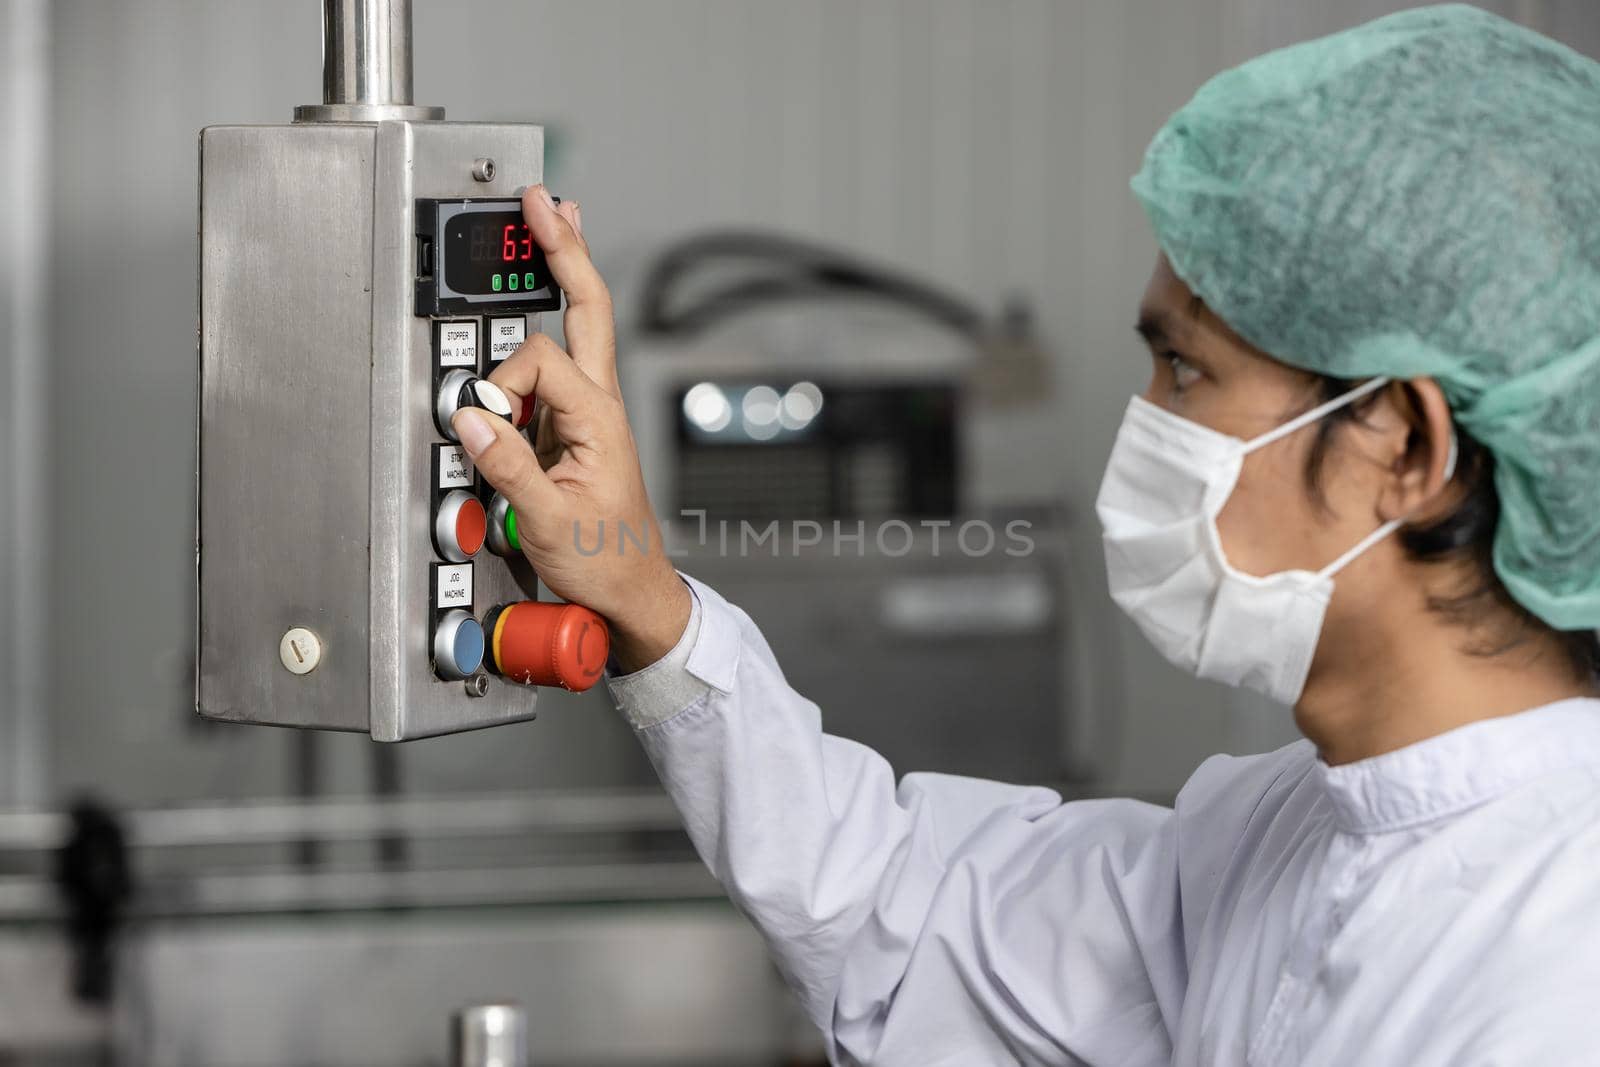 Staff workers working operate control machine in hygiene food factory.